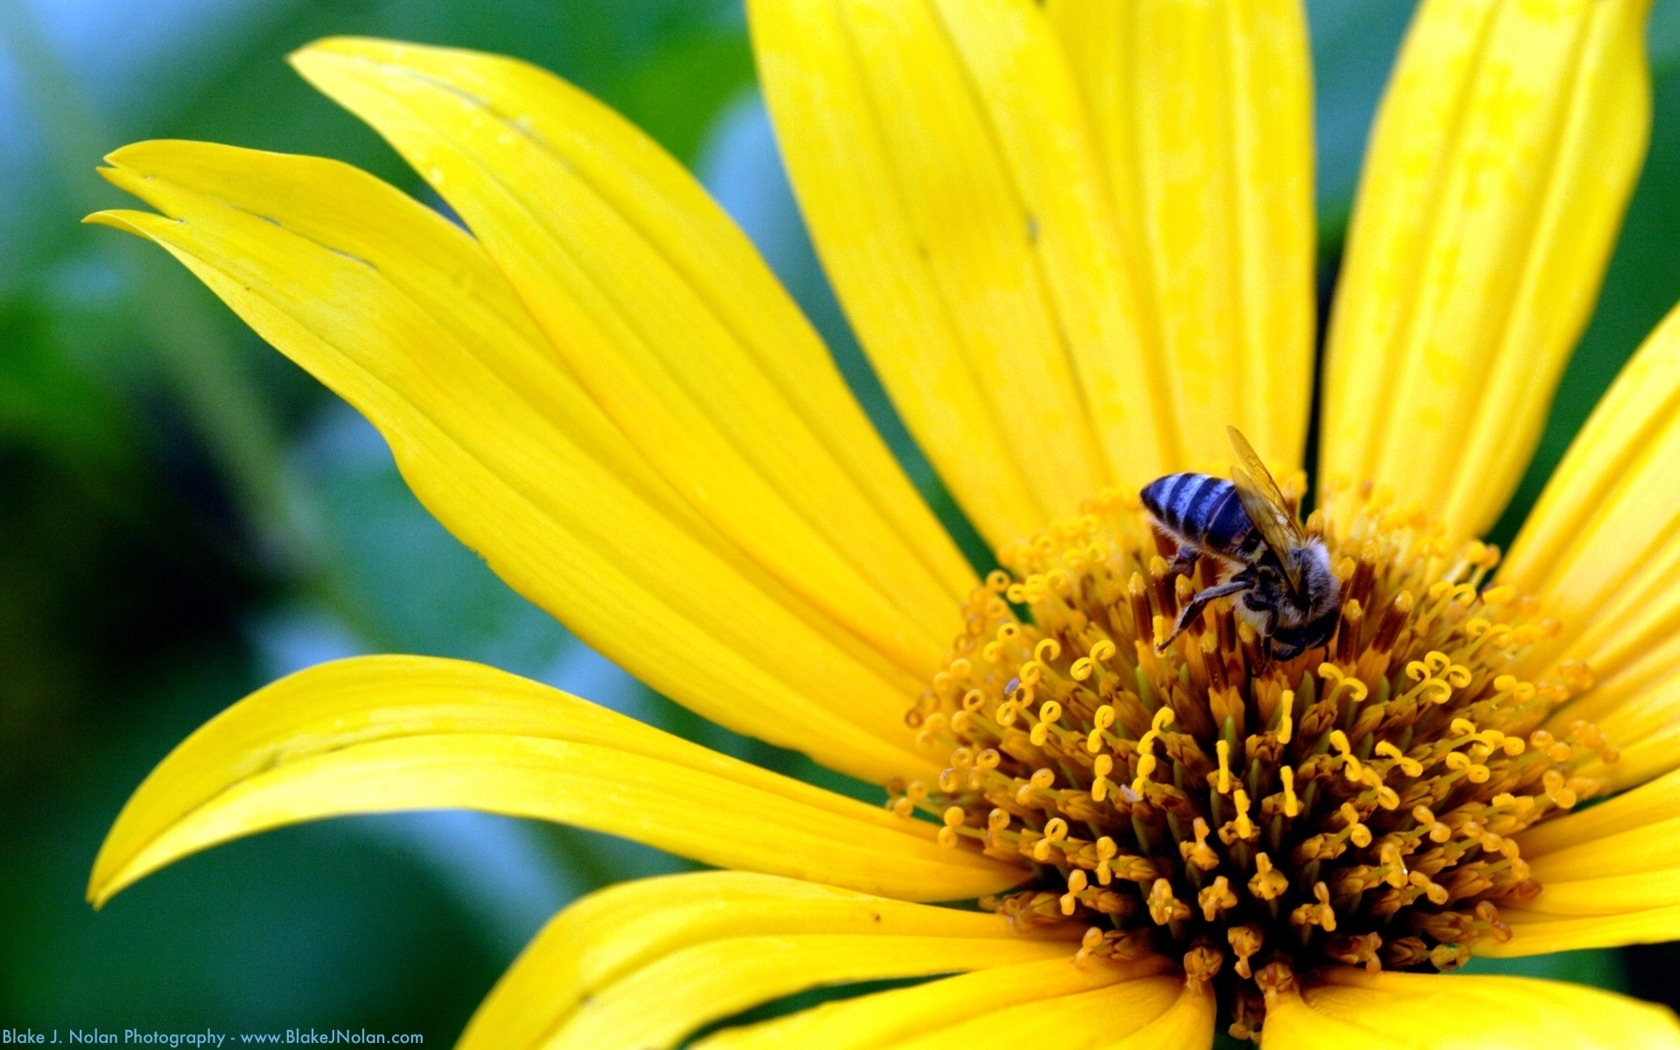 plants, flowers, insects, bees, yellow